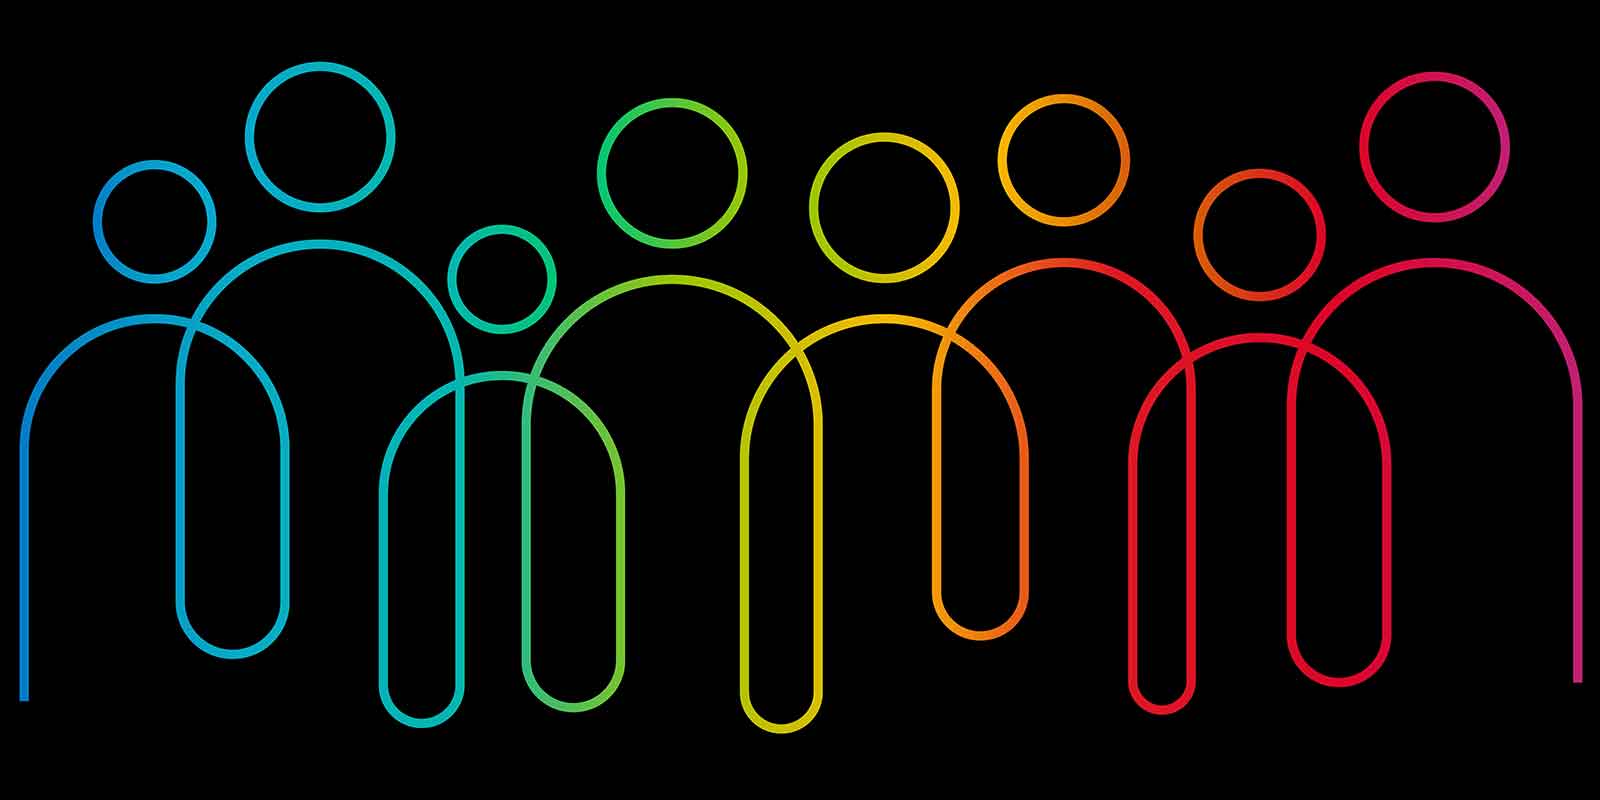 Row of figures with a rainbow gradient overlay